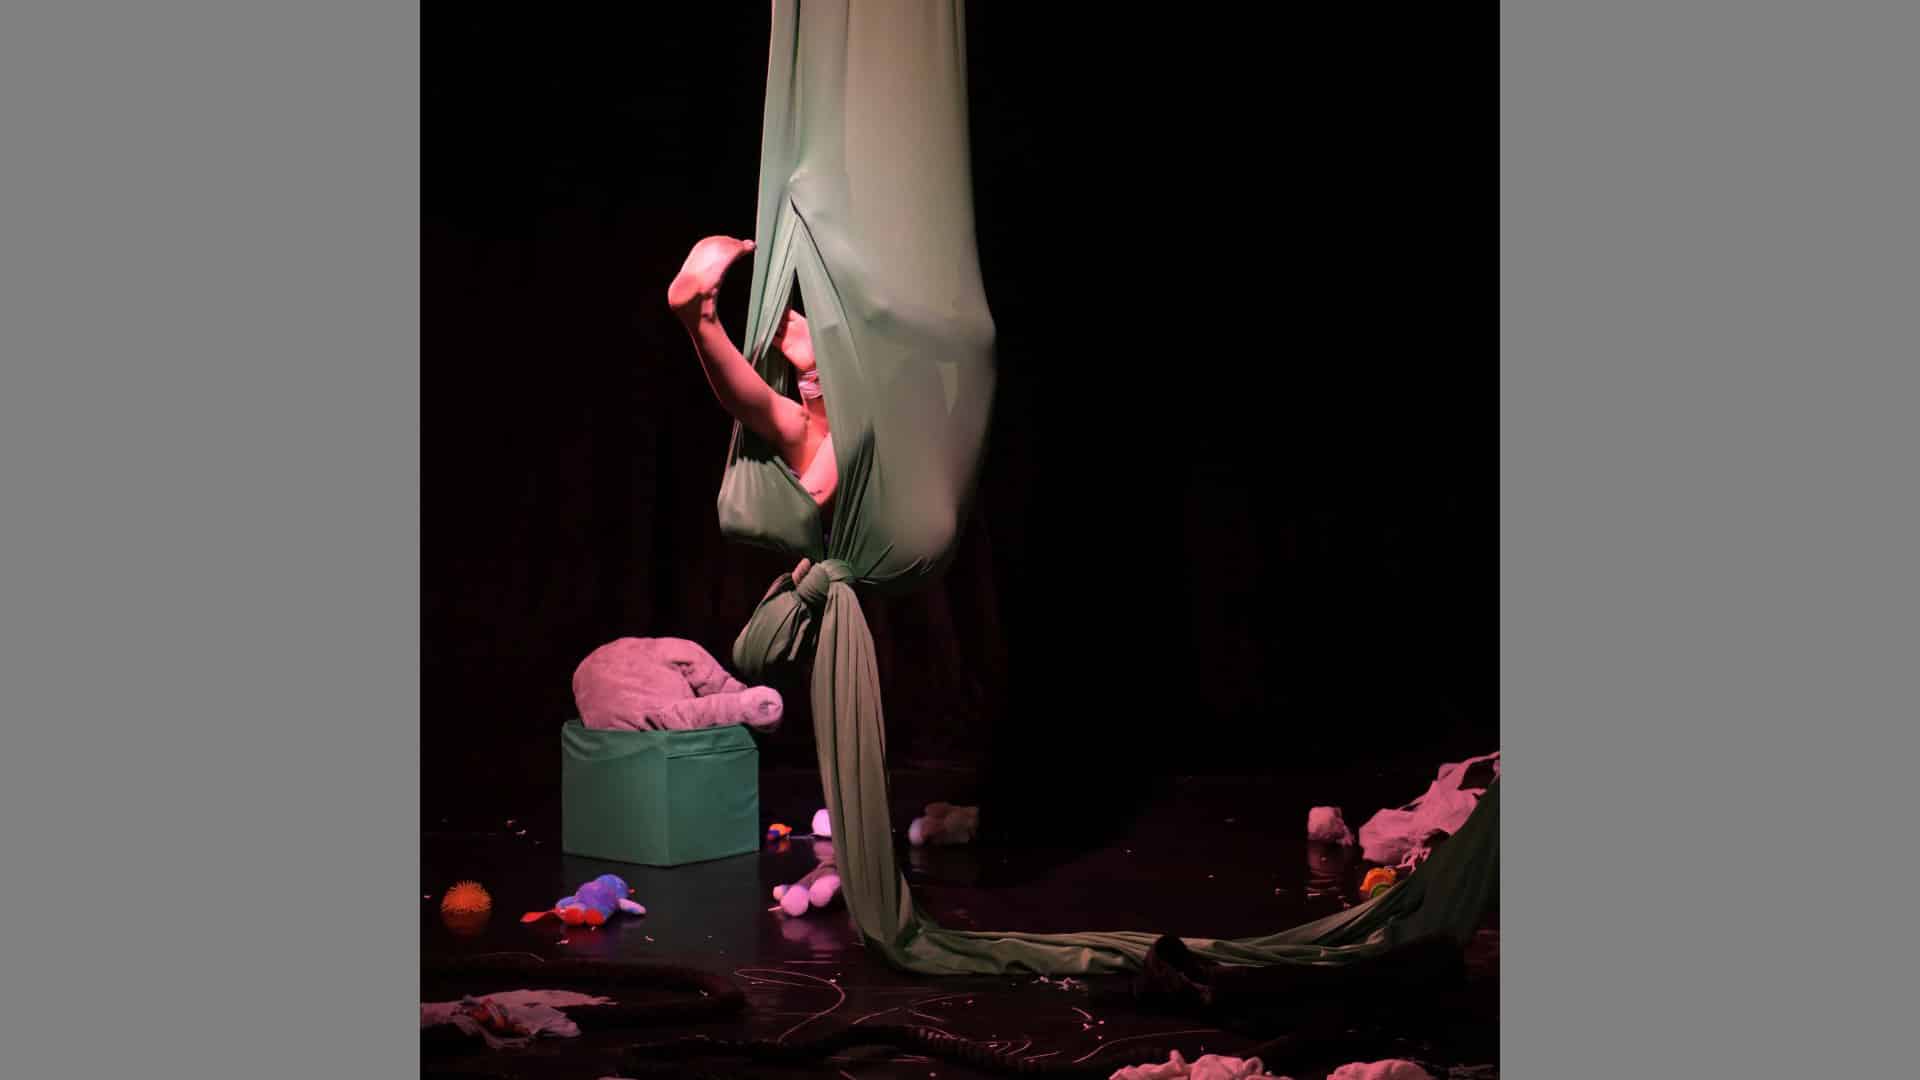 The performer is hidden in a cocoon of fabric. Only one leg is visible as it sticks out